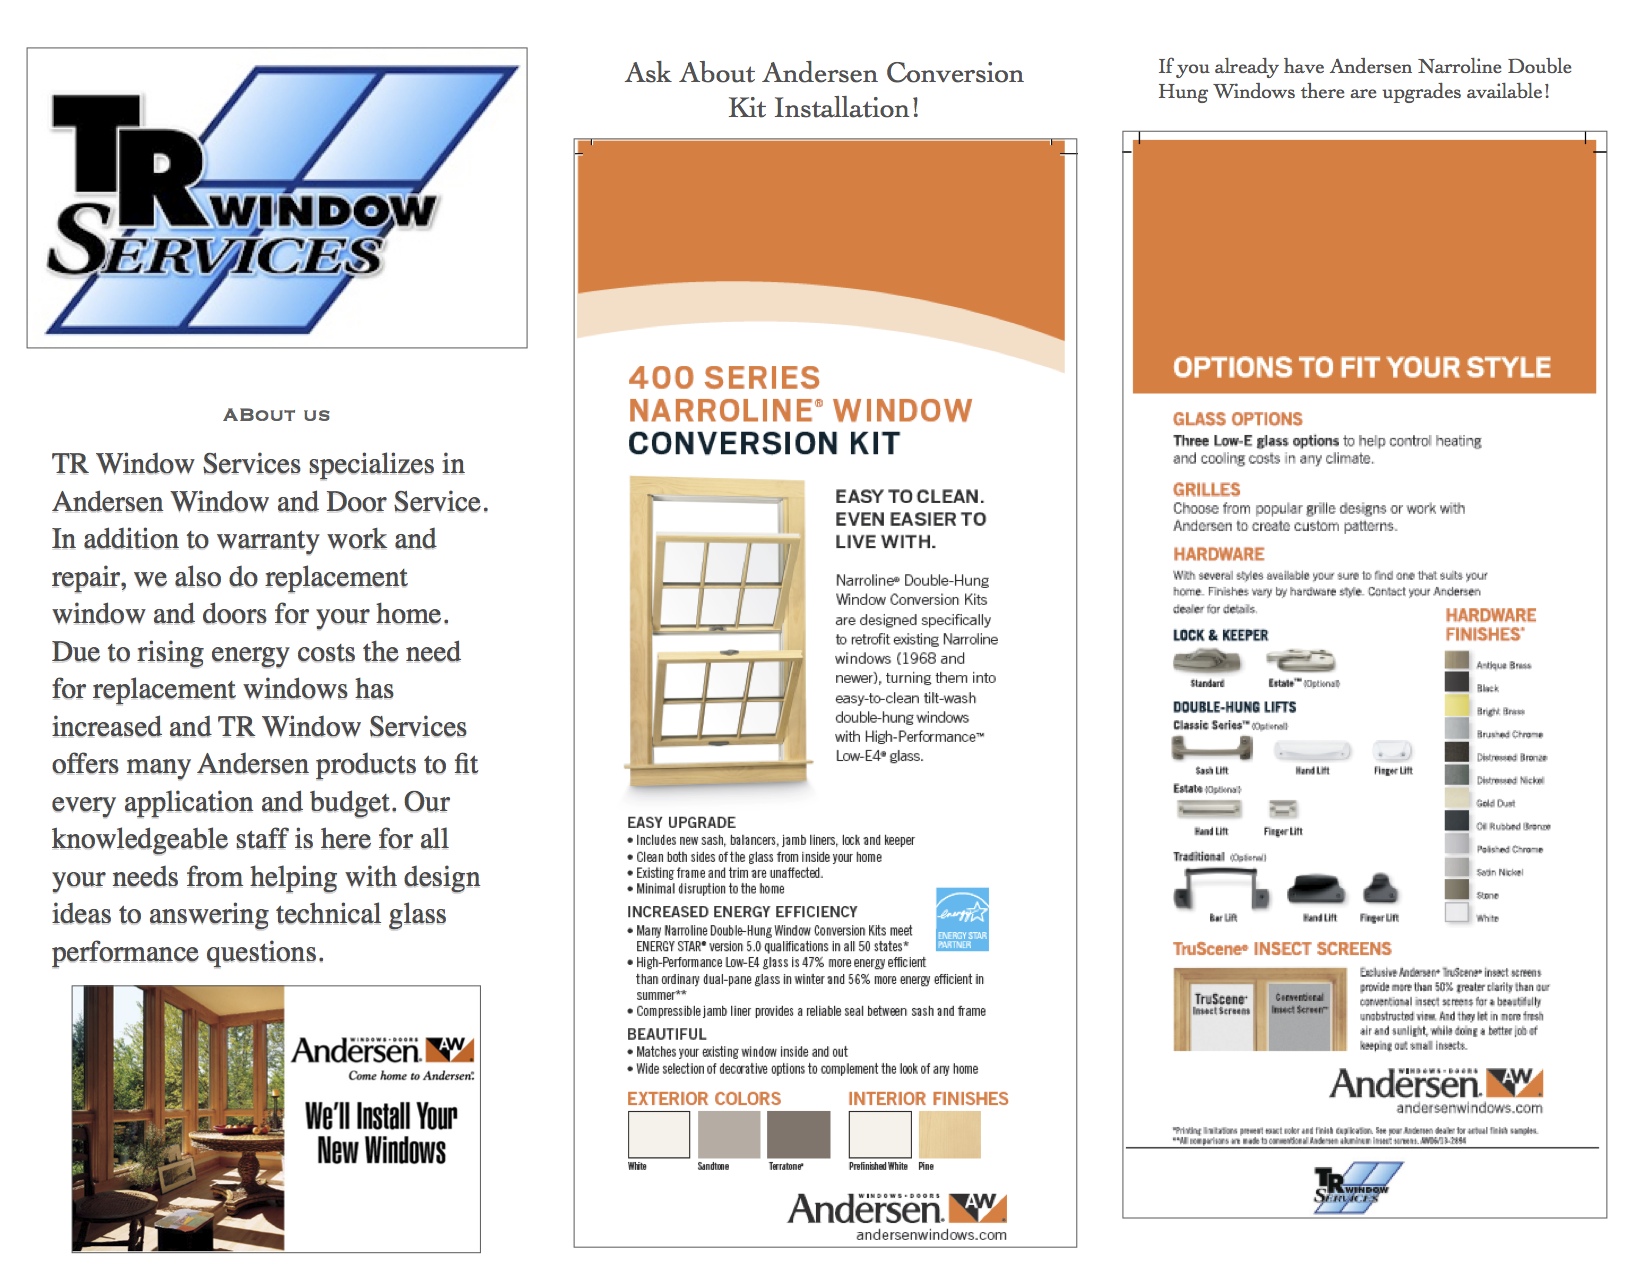 We are well trained in installation of the Andersen Window Conversion Kits